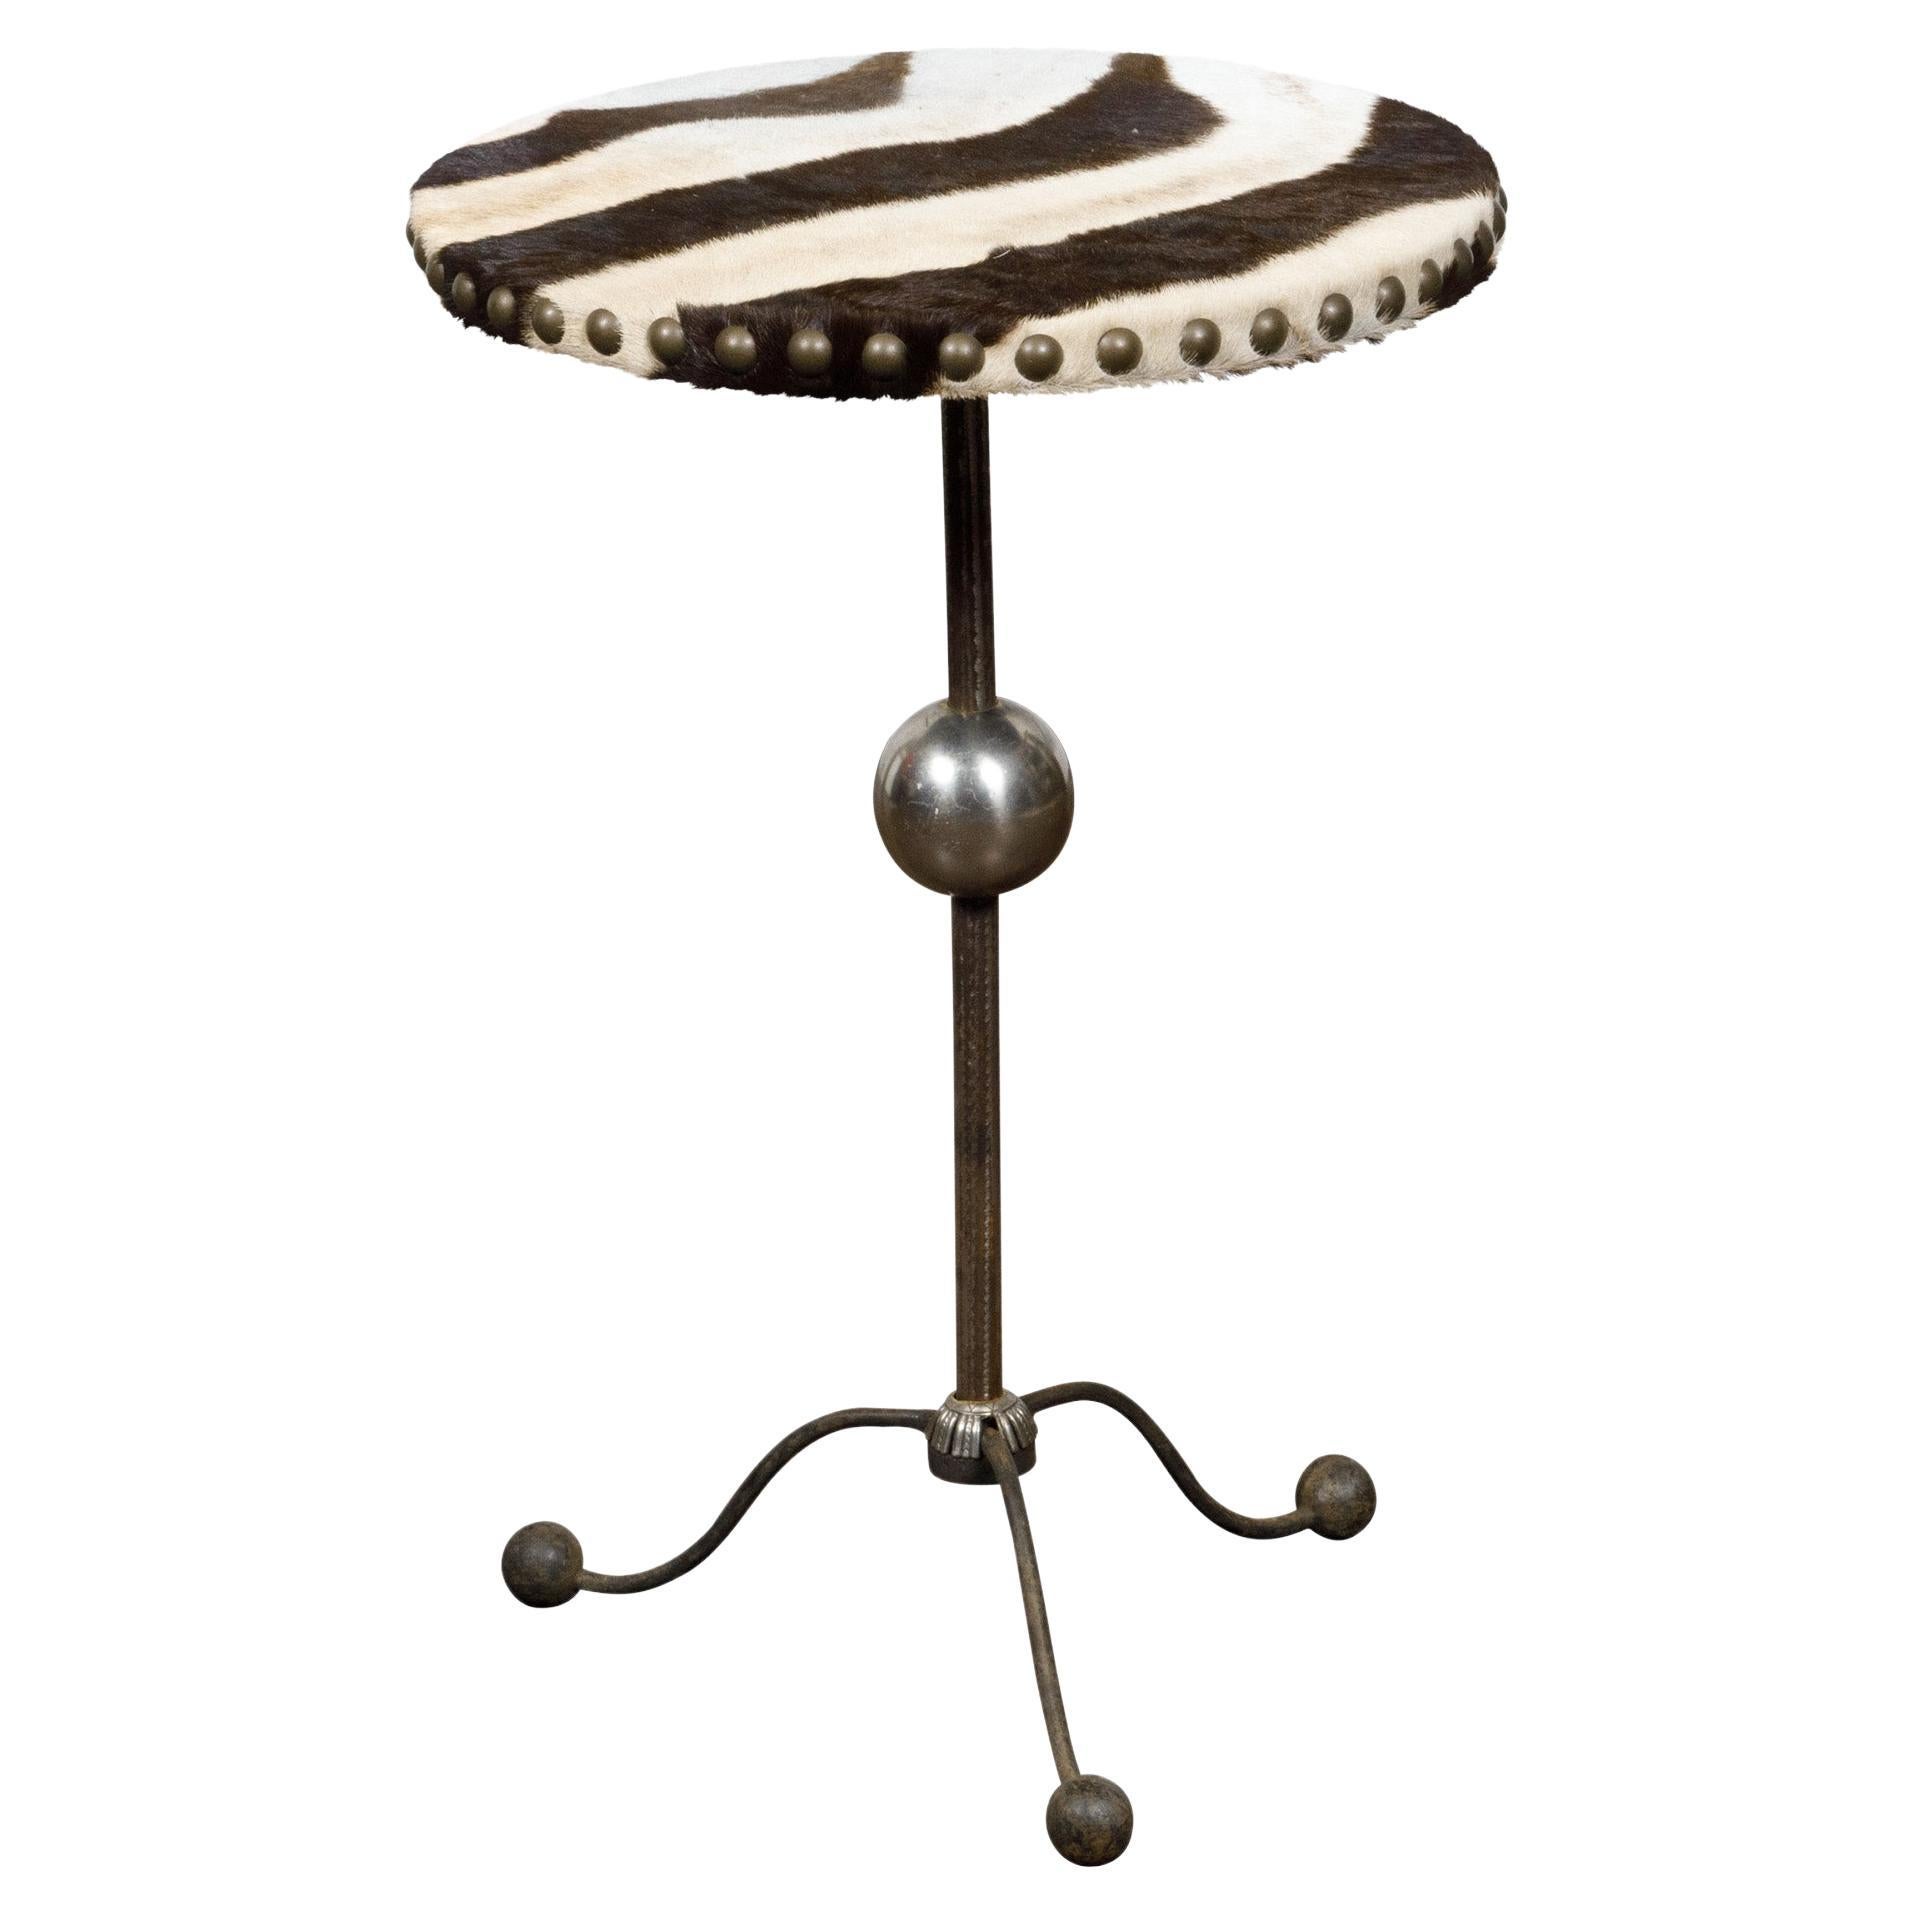 English Art Deco Steel Guéridon Side Table with Zebra Hide Upholstered Top For Sale